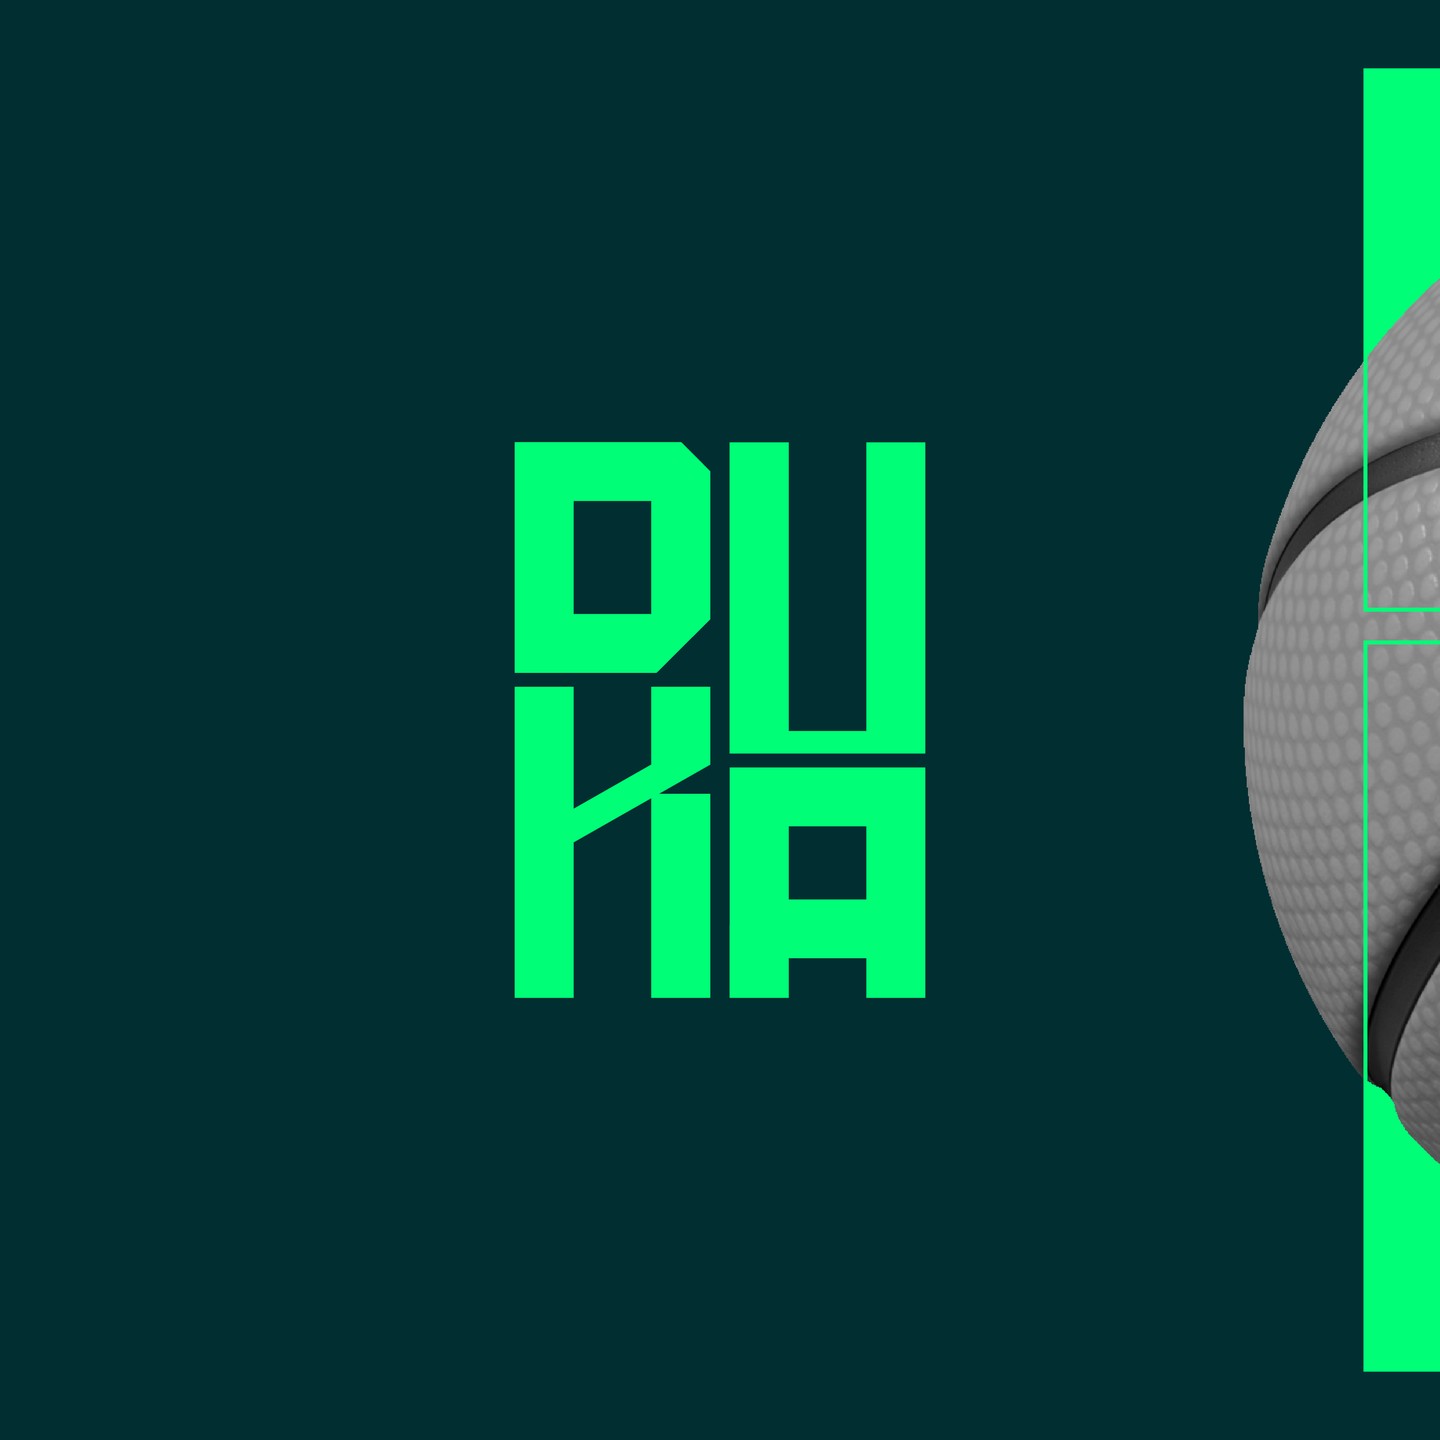 DUKA🏀 basketball event organizer. What about carousel flow 👀 let me know. Happy Monday 😉

Design By @glazedstudio.design